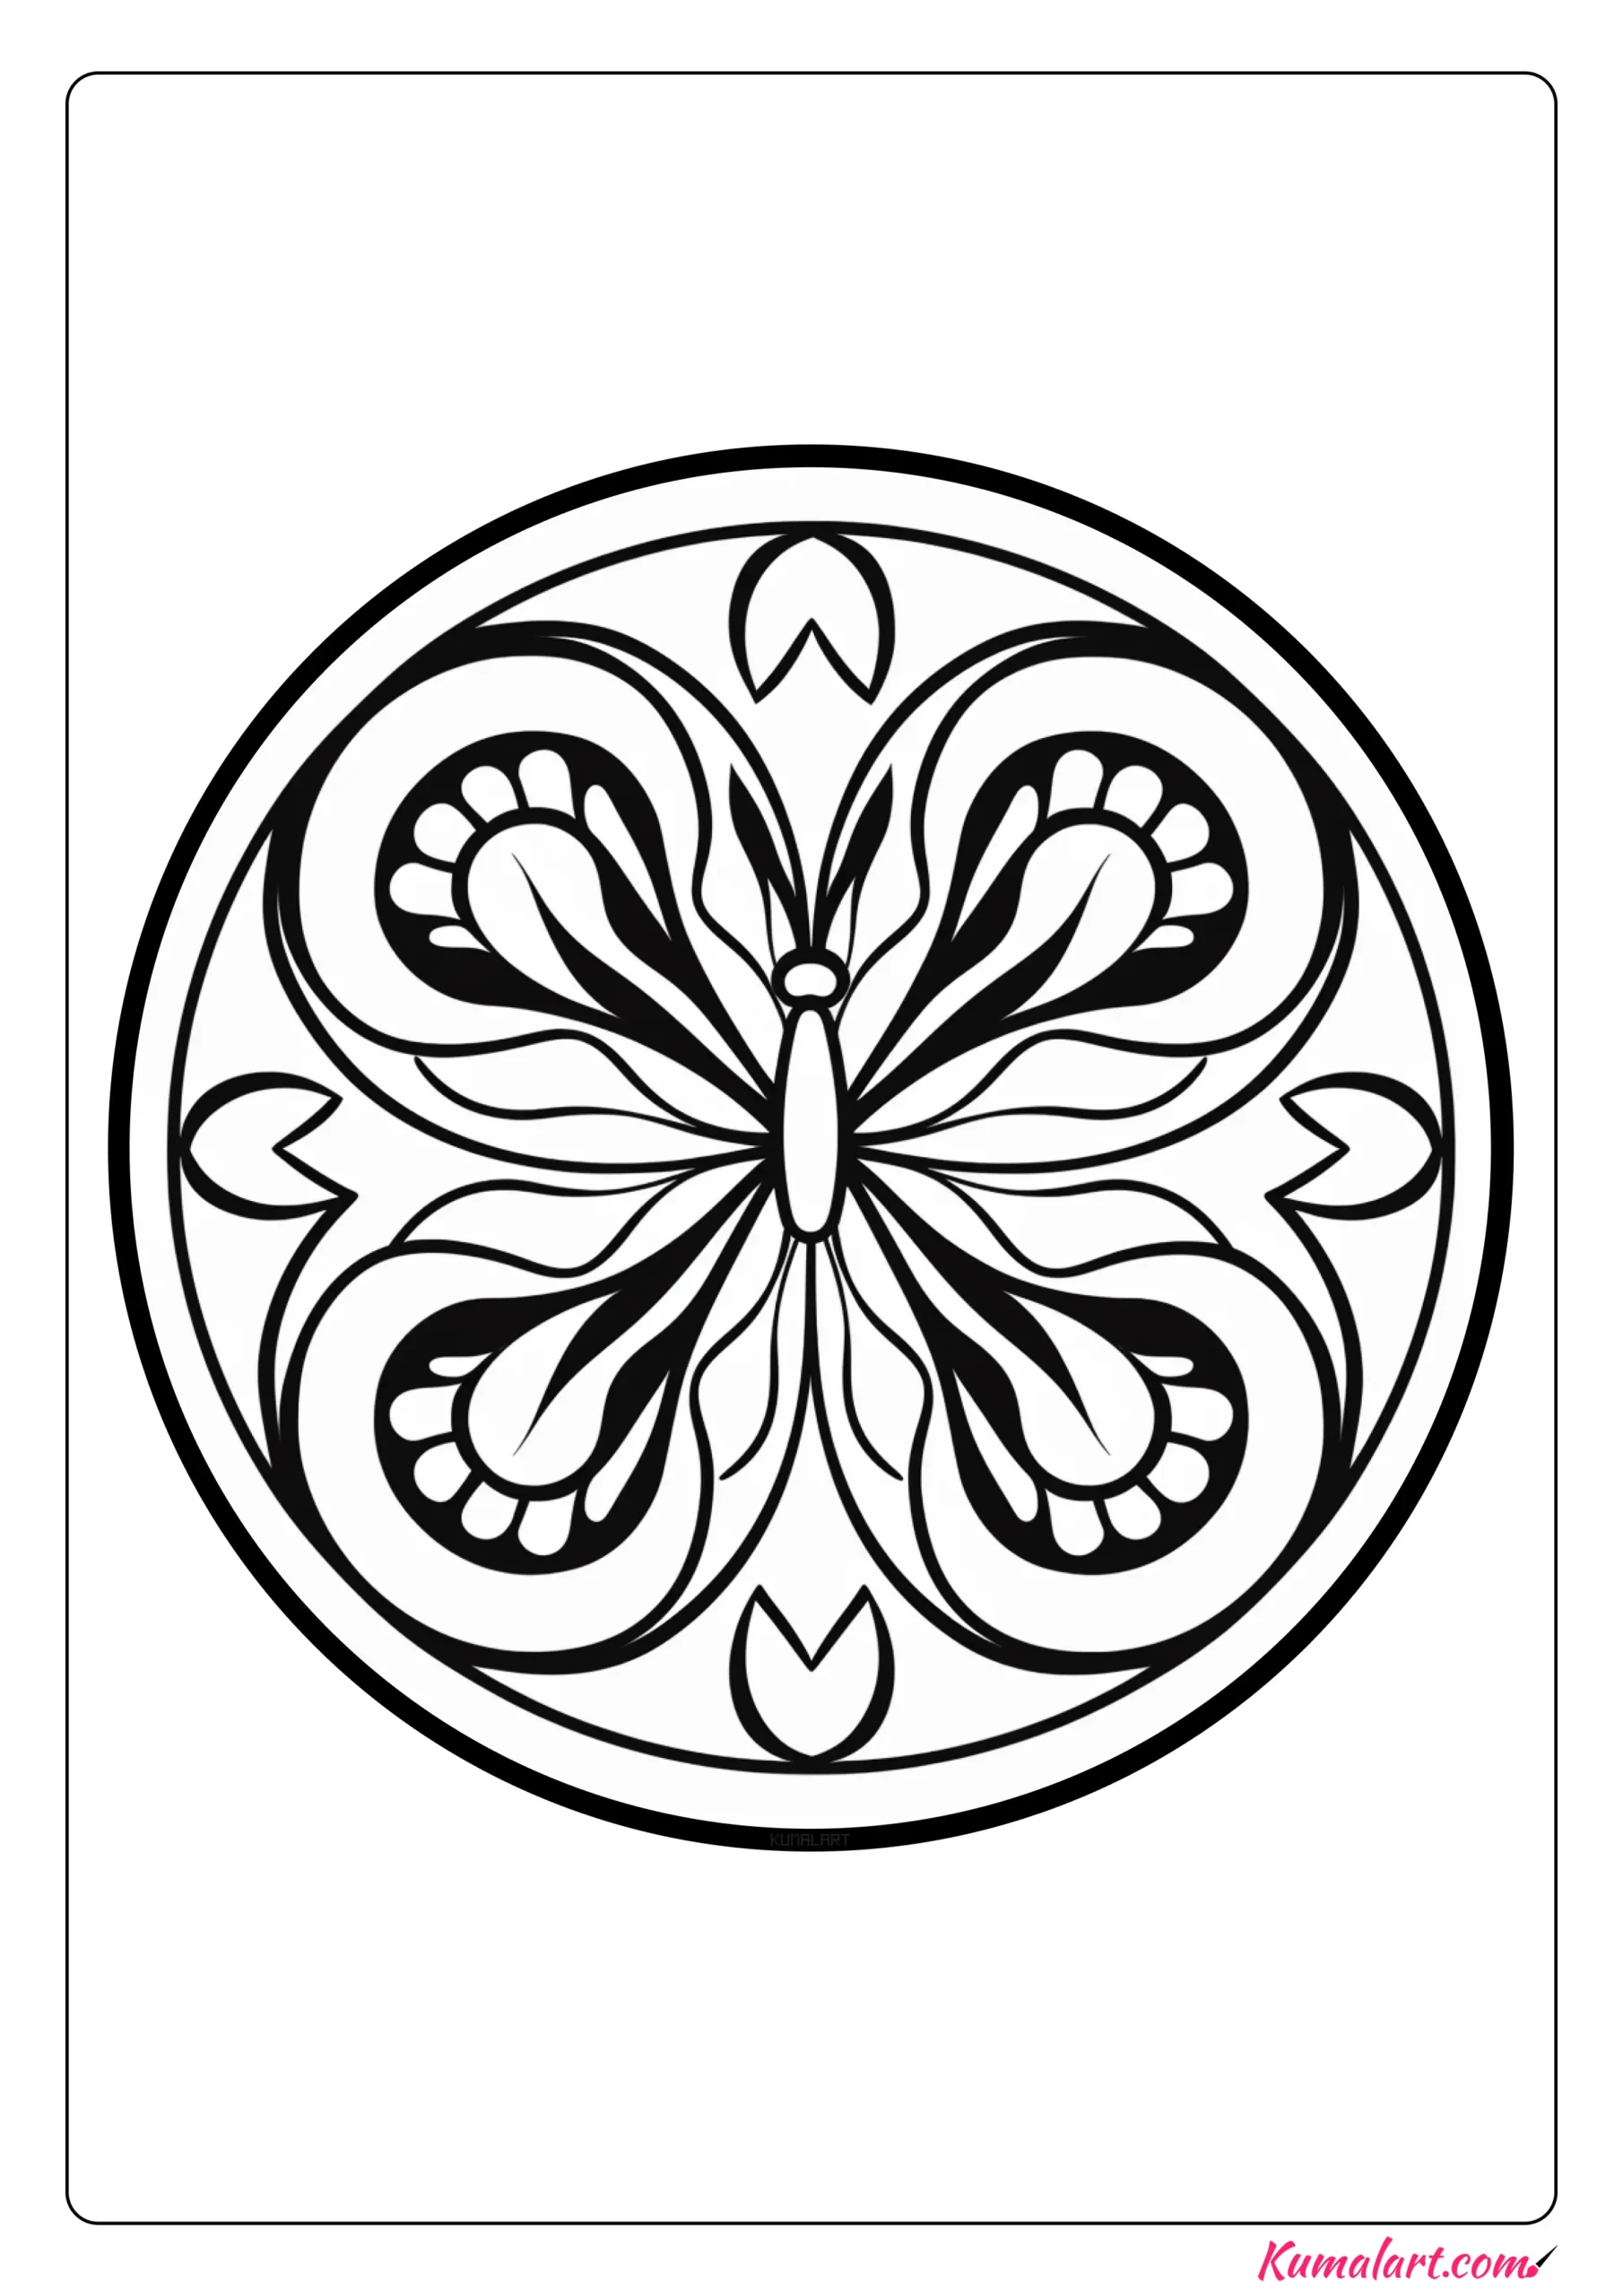 Alan the Butterfly Mandala Coloring Page